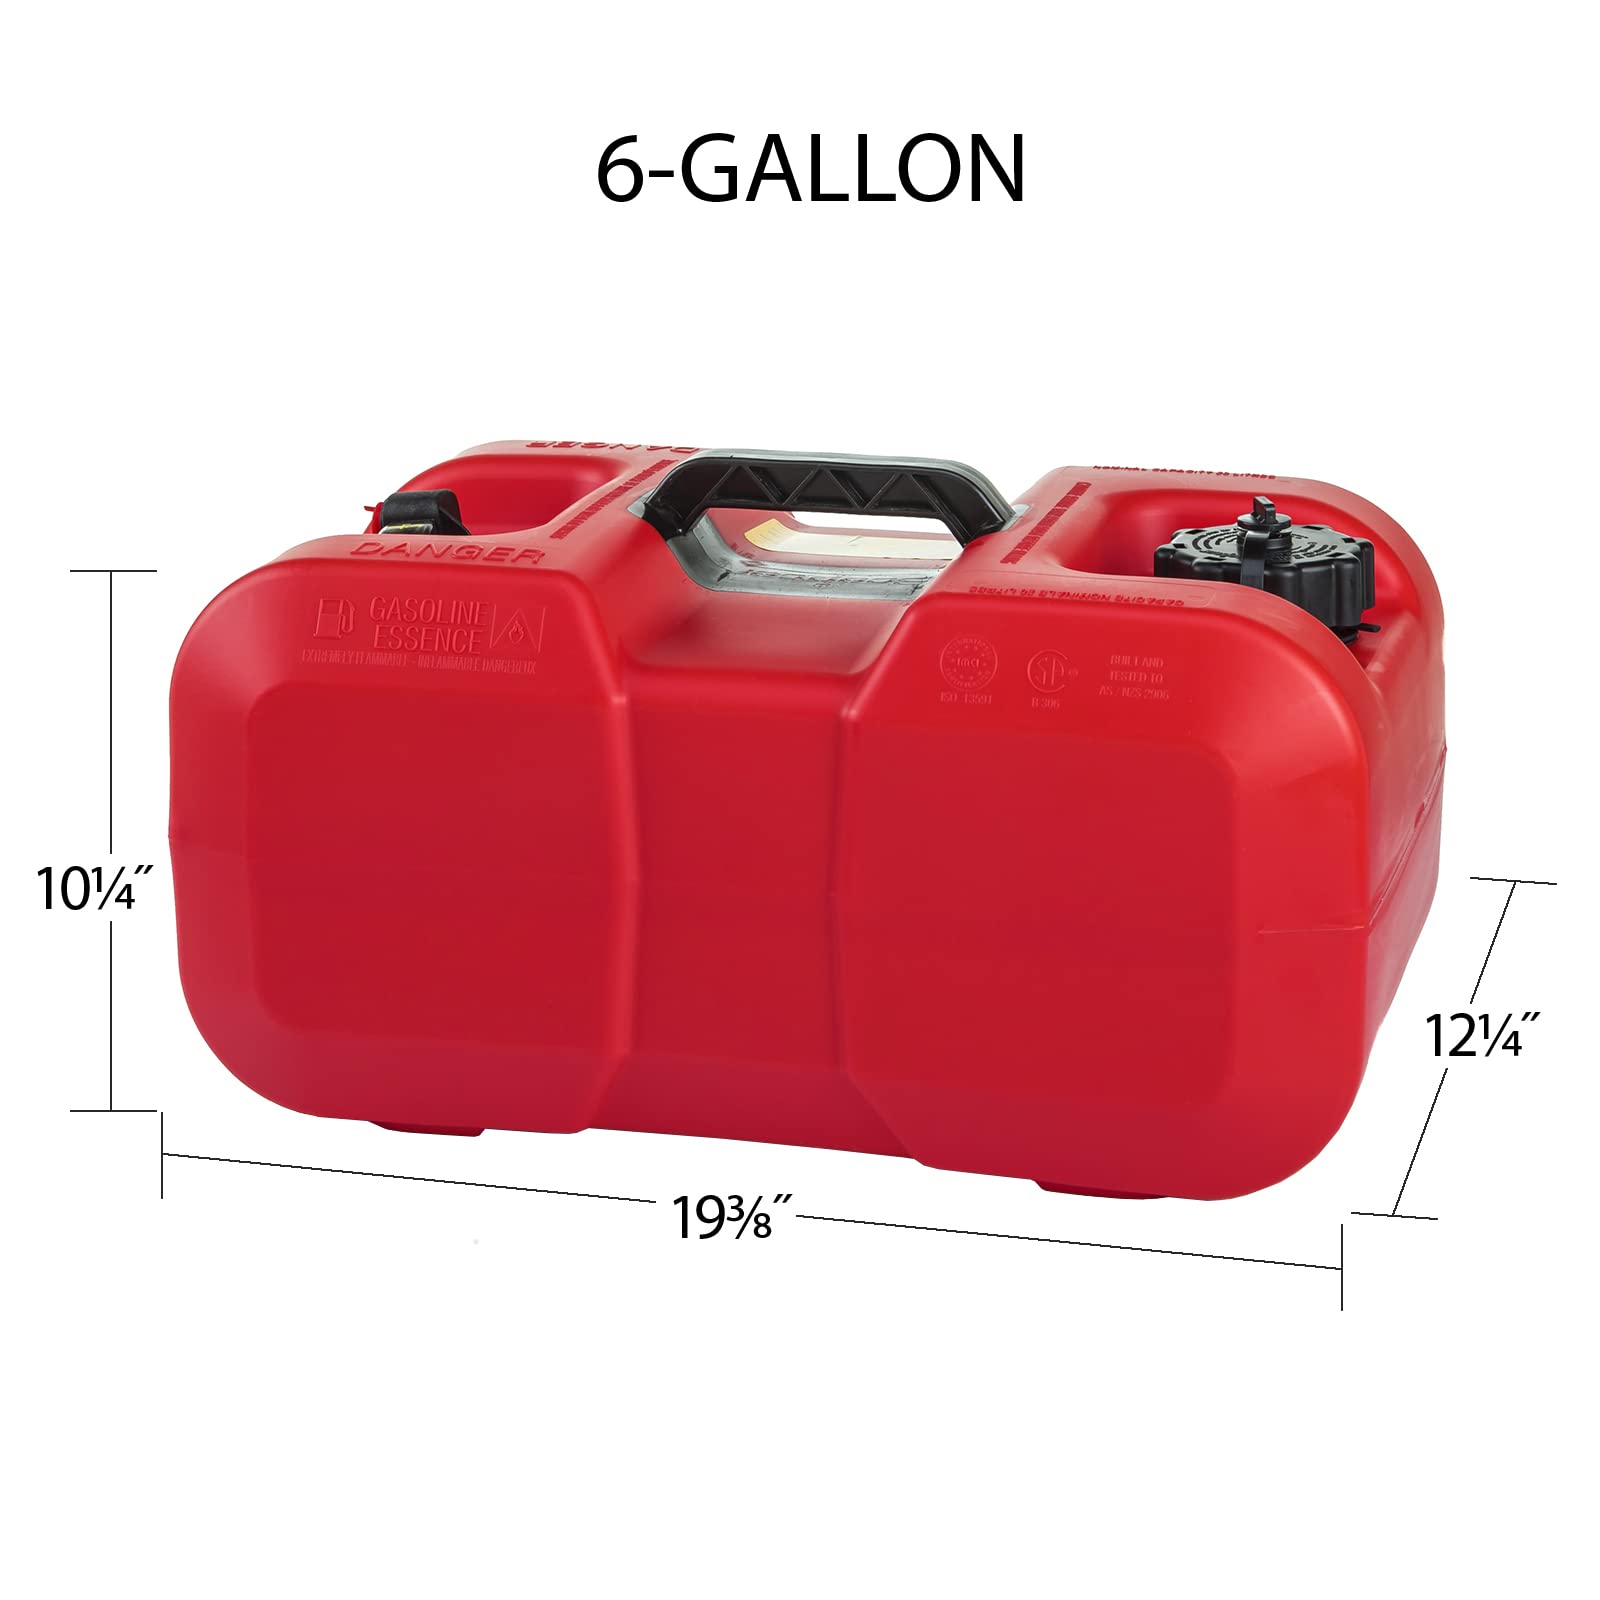 Scepter 10511 Rectanglular 6 Gallon Under Seat Portable Marine Fuel Tank With Handle, 19-Inches x 12-Inches x 10-Inches, Red